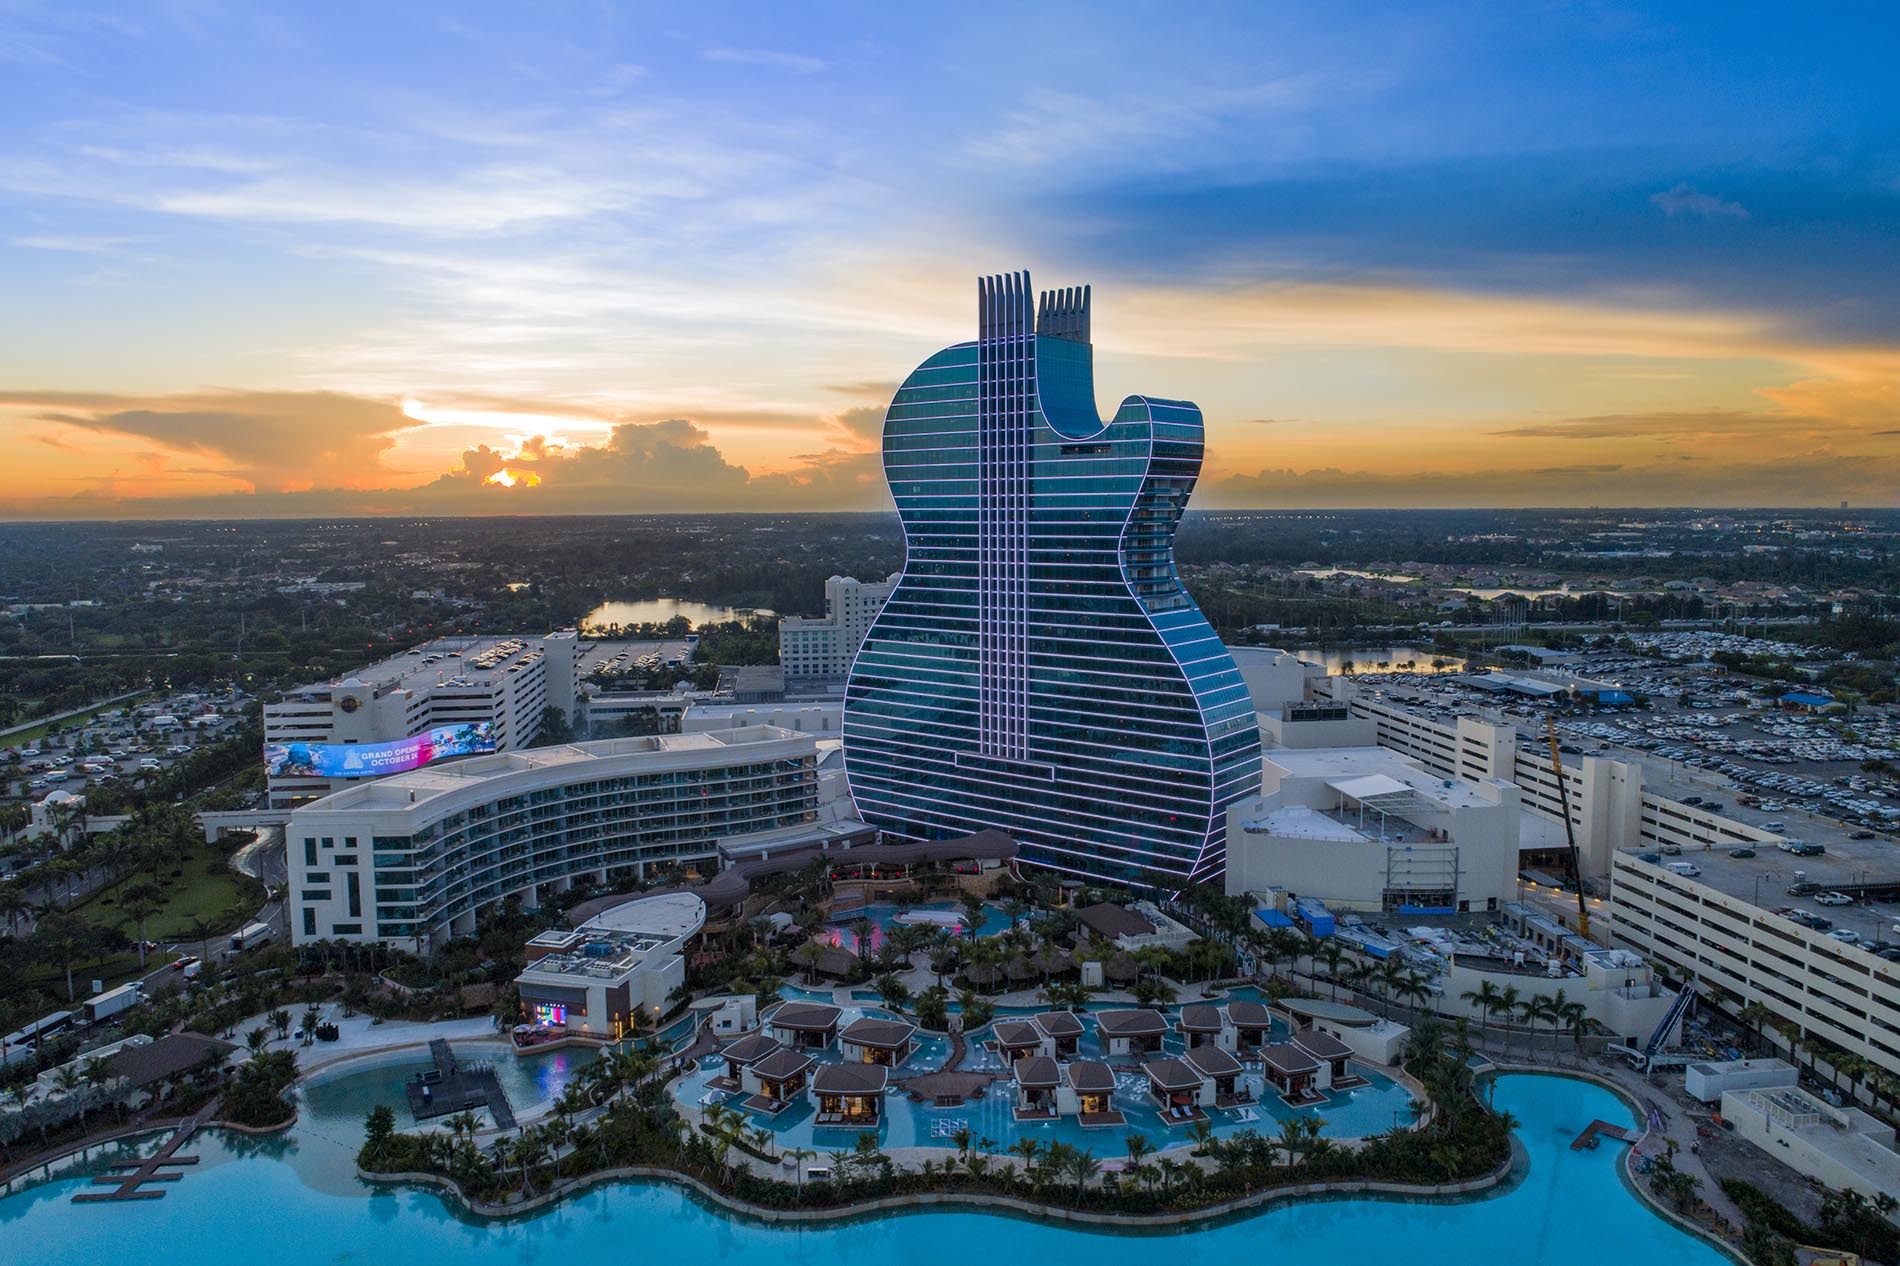 Drone Photography of the Hard Rock Hotel and Casino in Hollywood Florida at Sunset